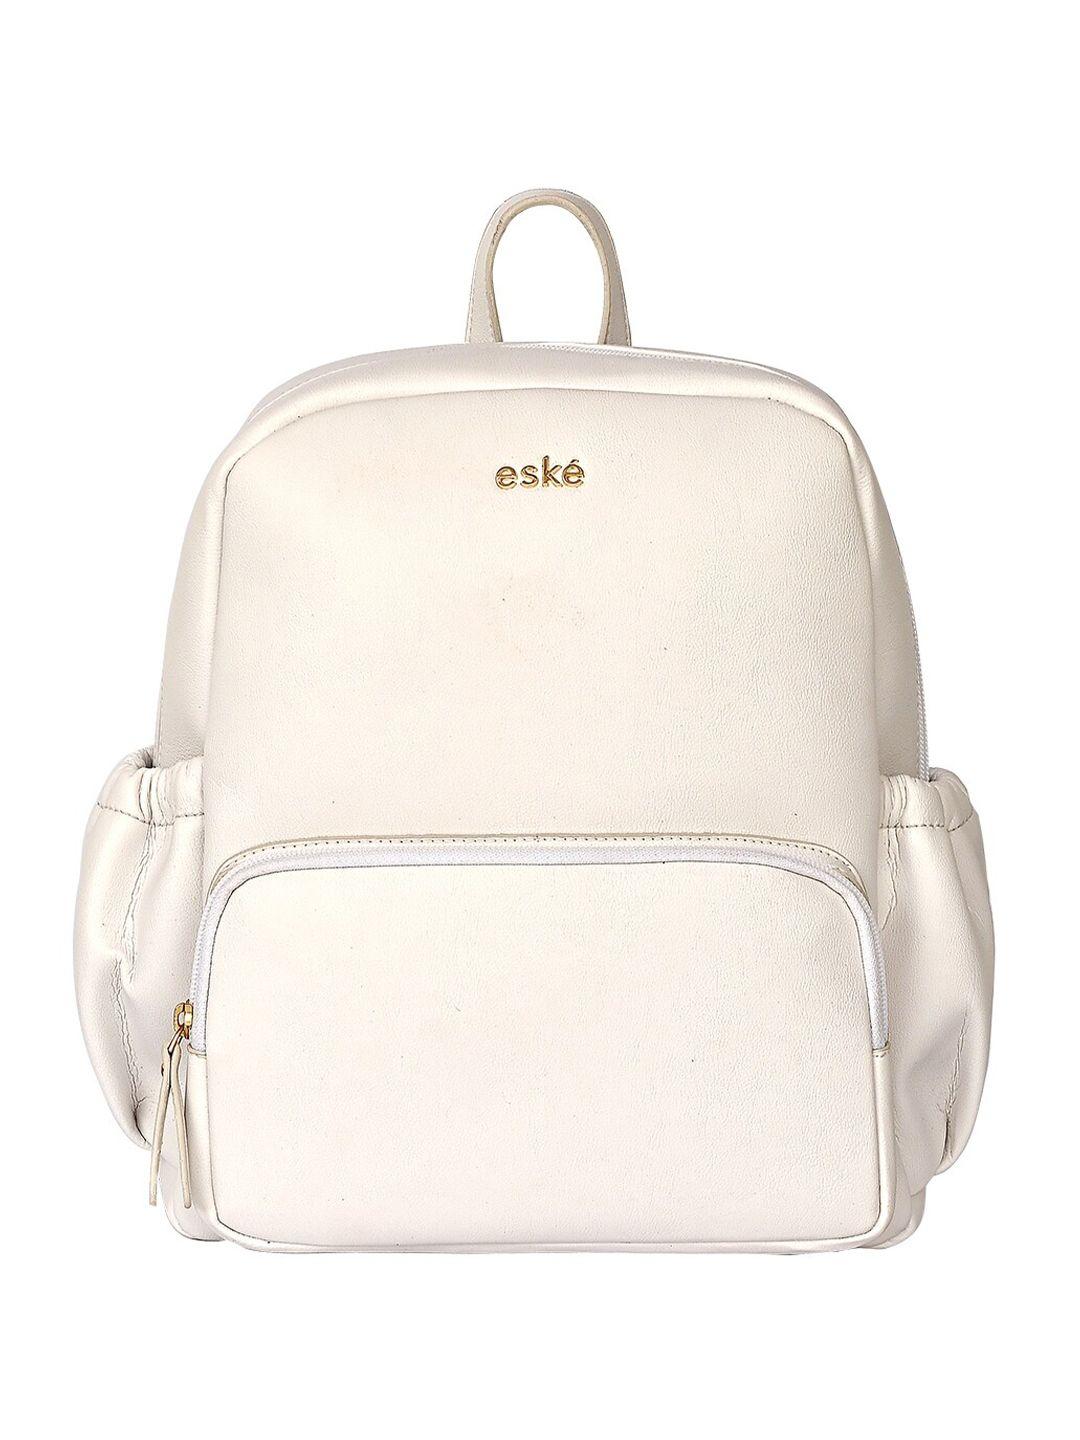 eske women white backpack with compression straps